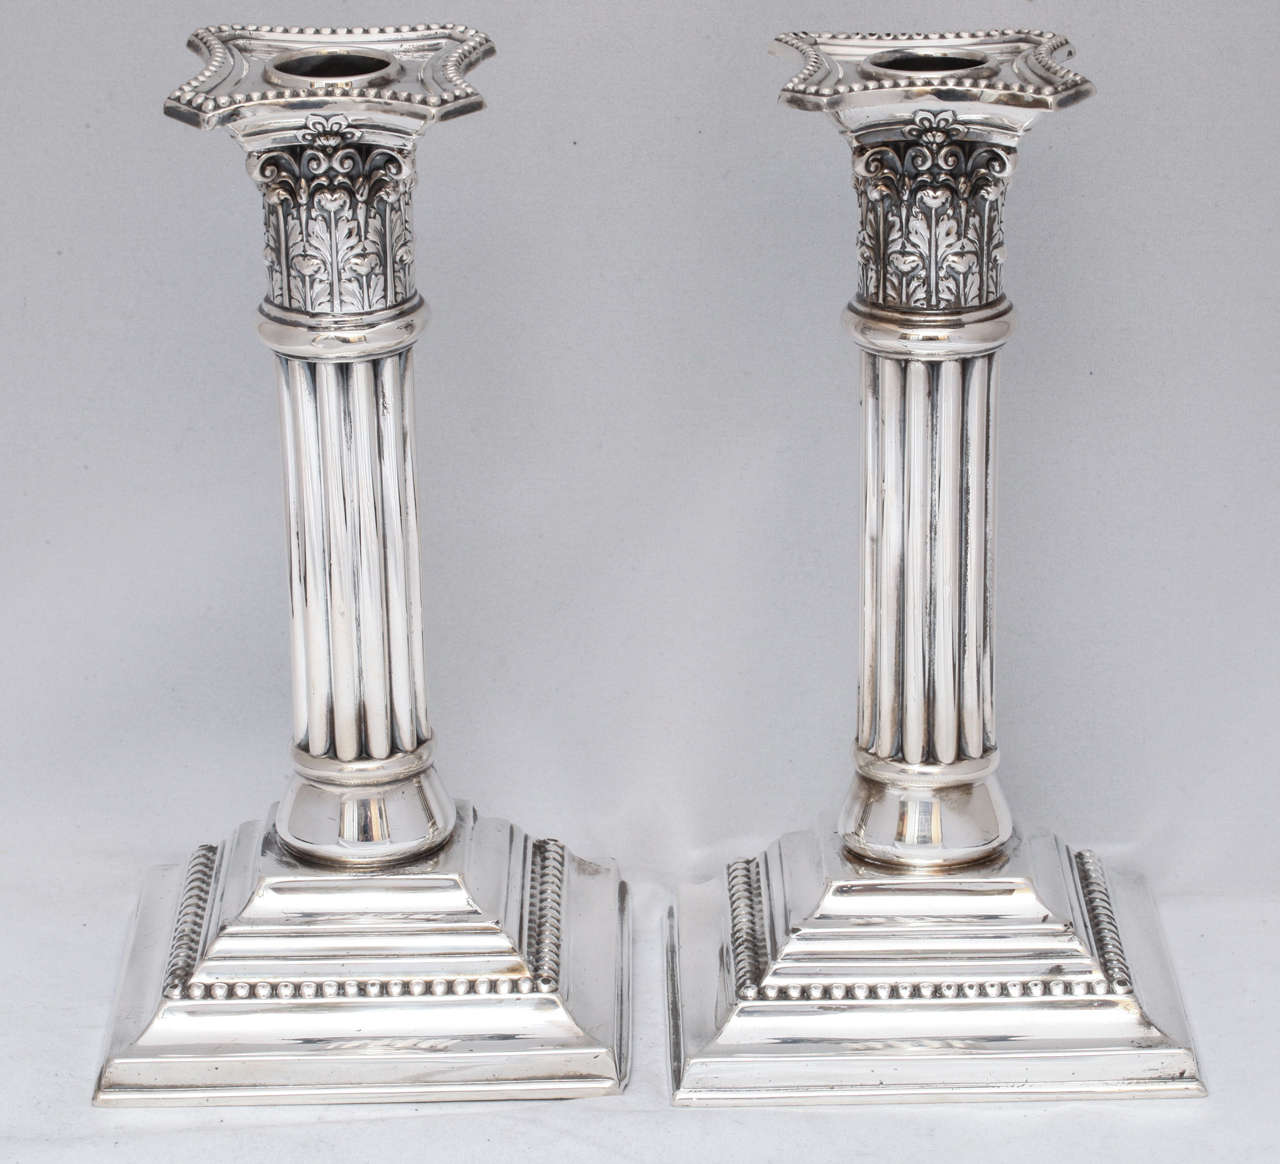 Edwardian pair of sterling silver, Corinthian column candlesticks, The Mauser Manufacturing Corp., New York, circa 1905. Measures: 8 1/4